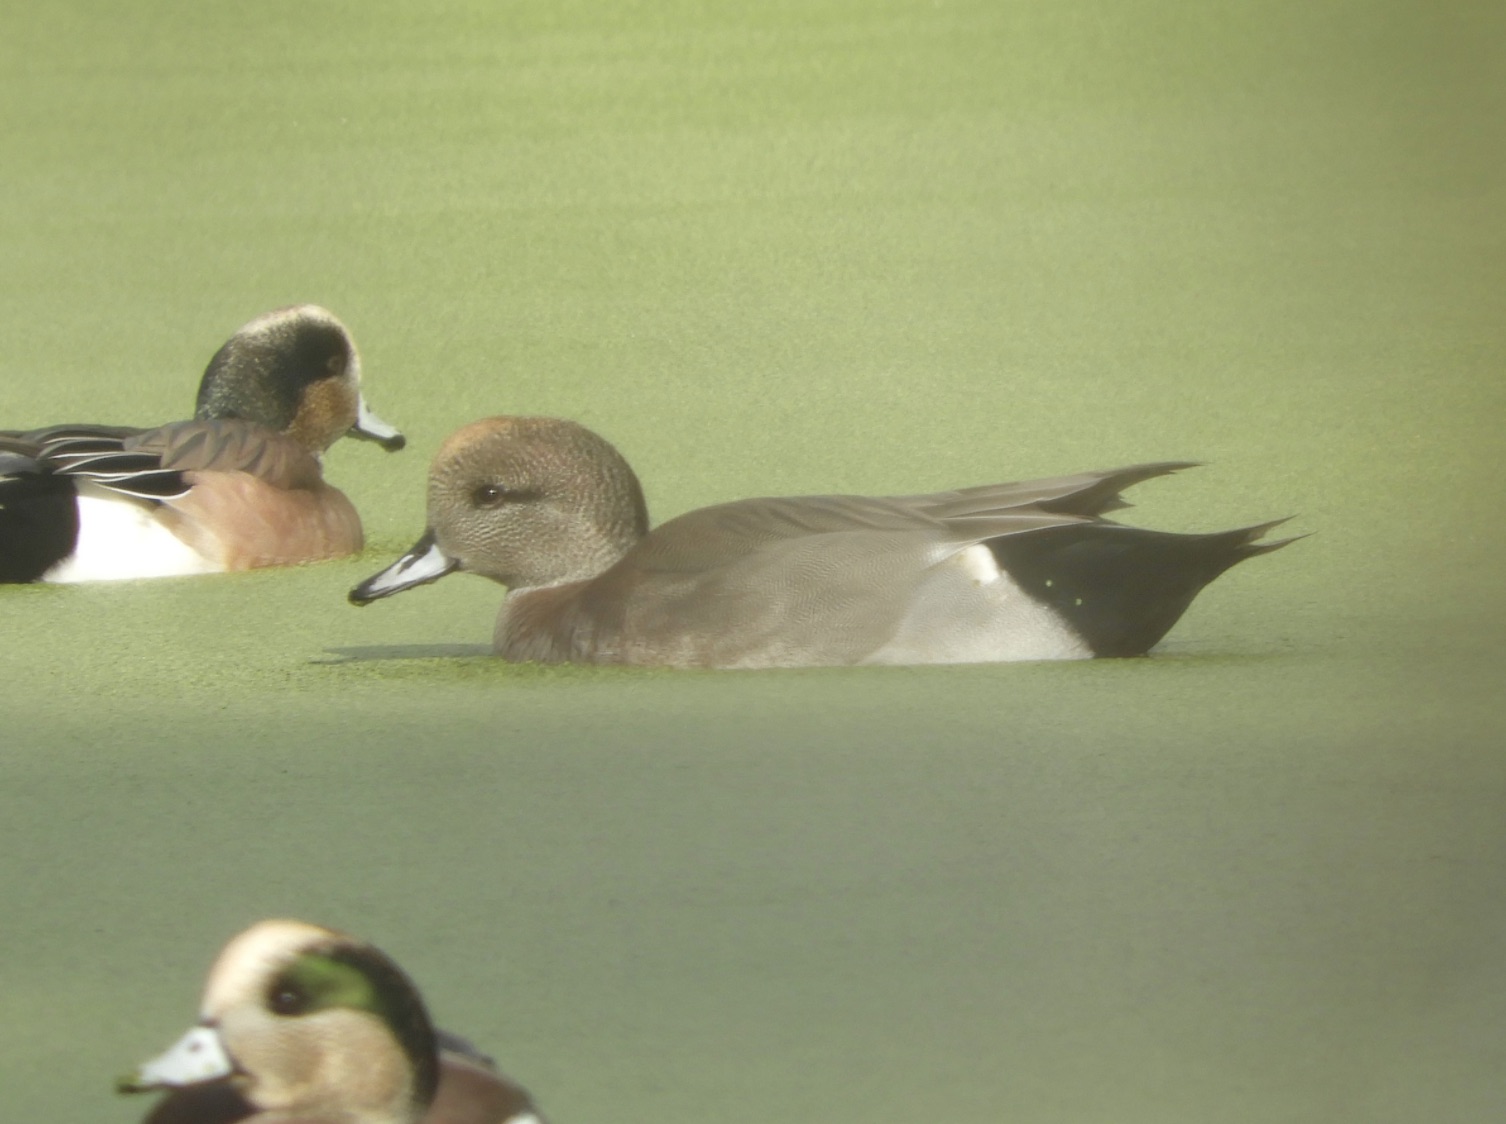 The body of this hybrid resembles a gadwall, while the head and bill have the characteristics of a wigeon.